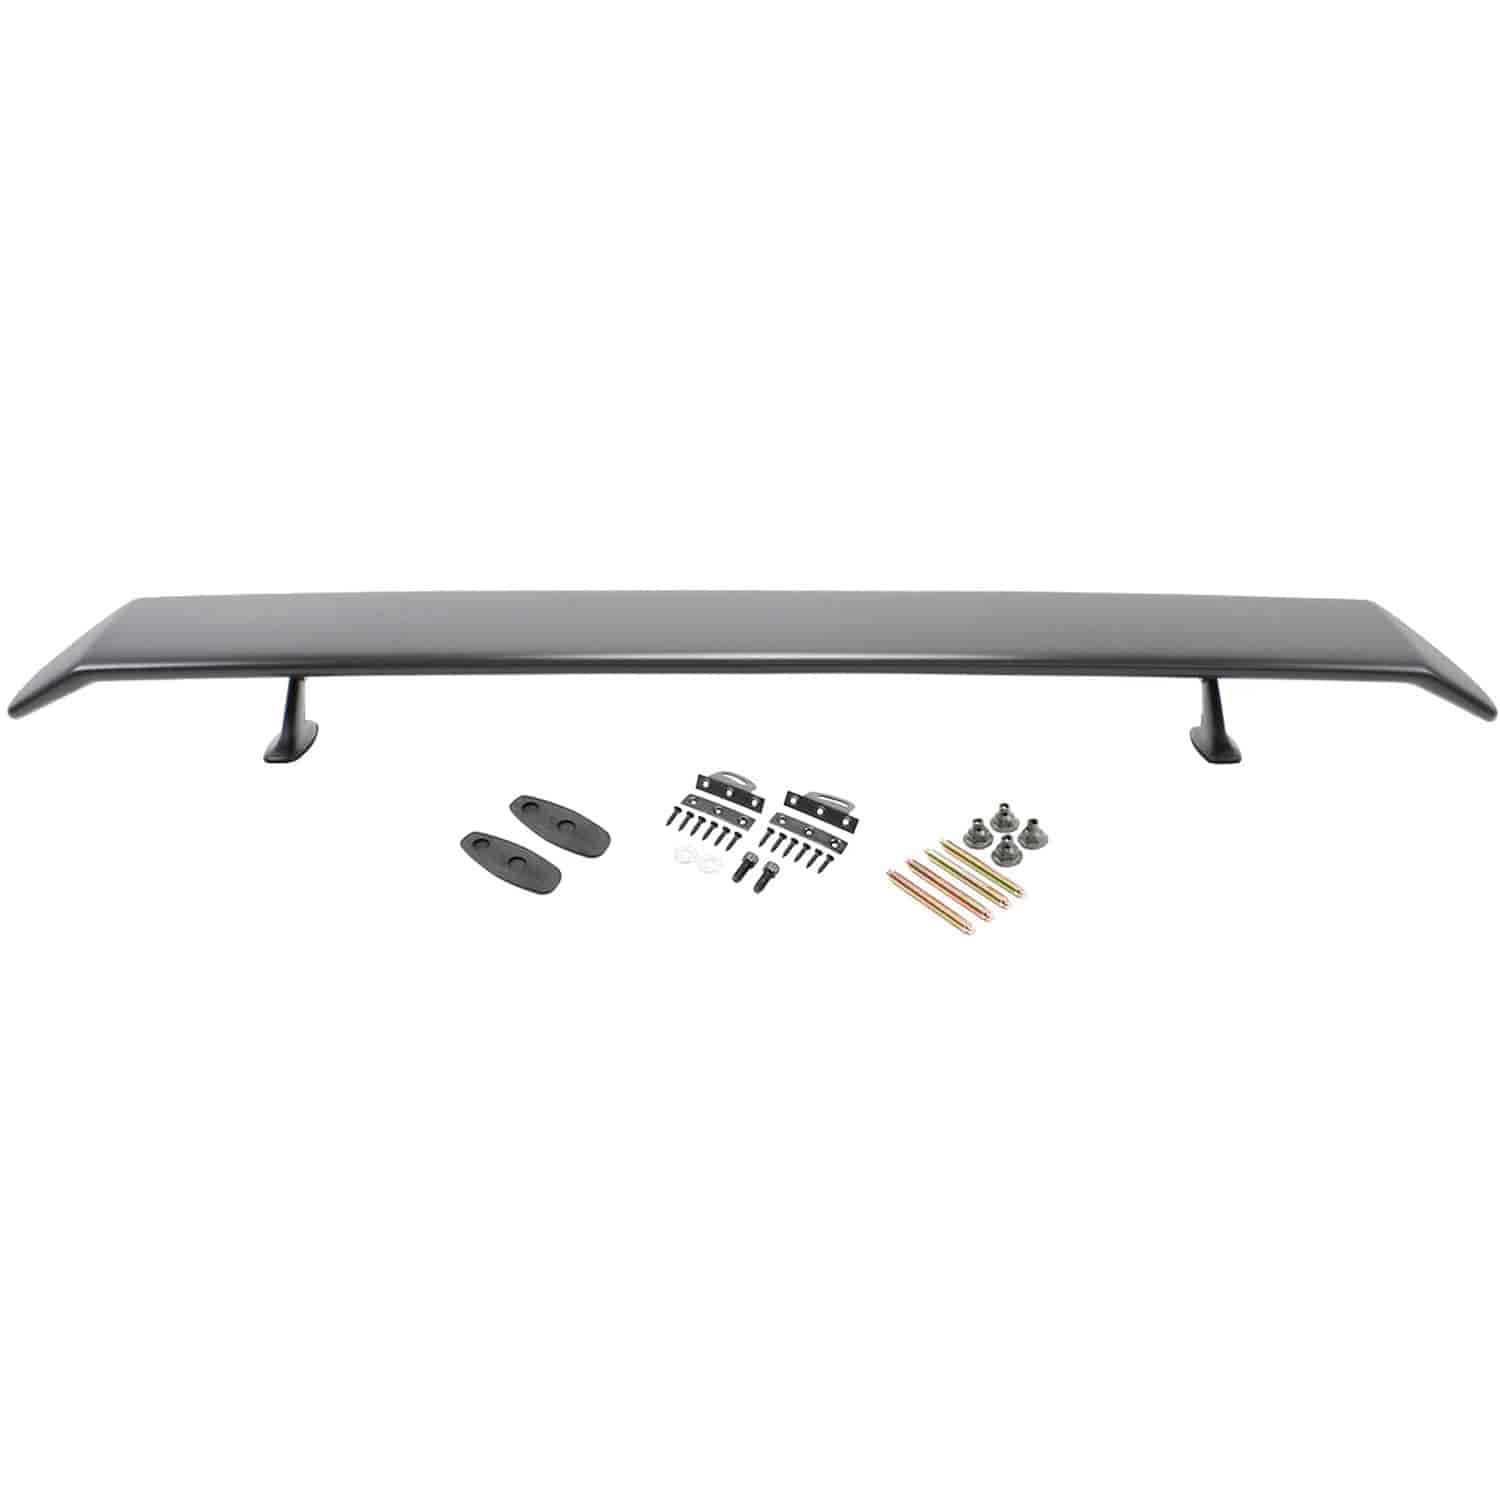 70 Mustang Rear Wing Value Spoiler Complete Kit